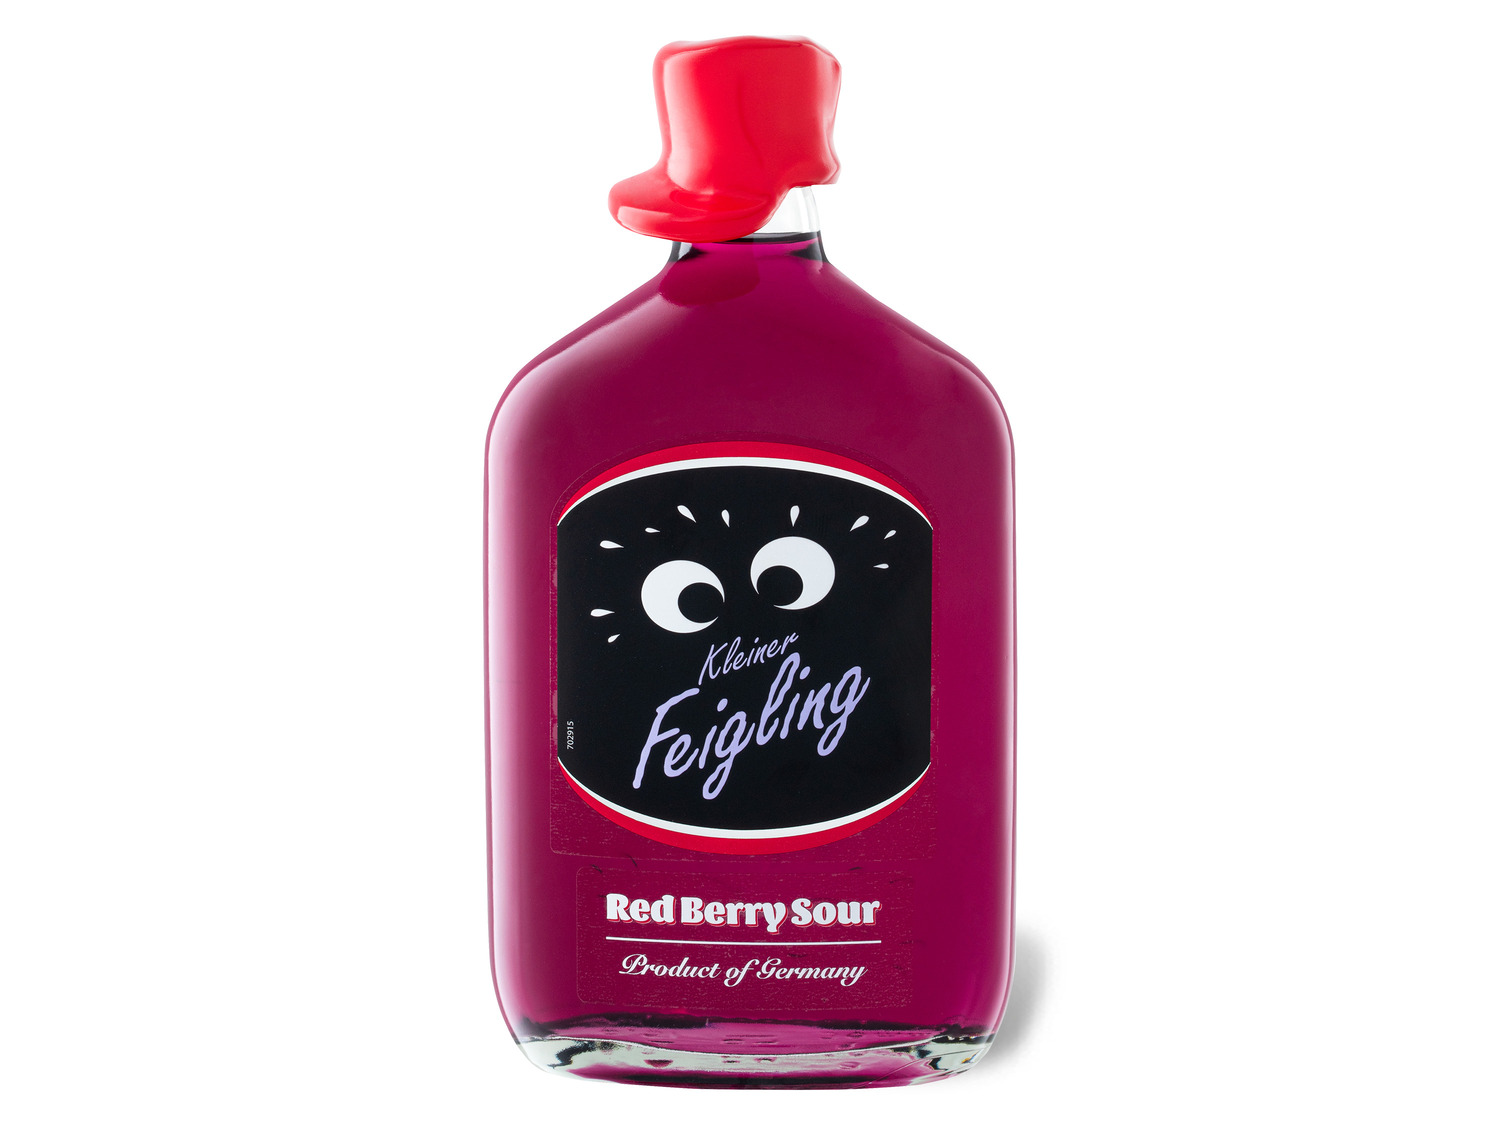 Feigling LIDL 15% Vol Sour Kleiner | Berry Red